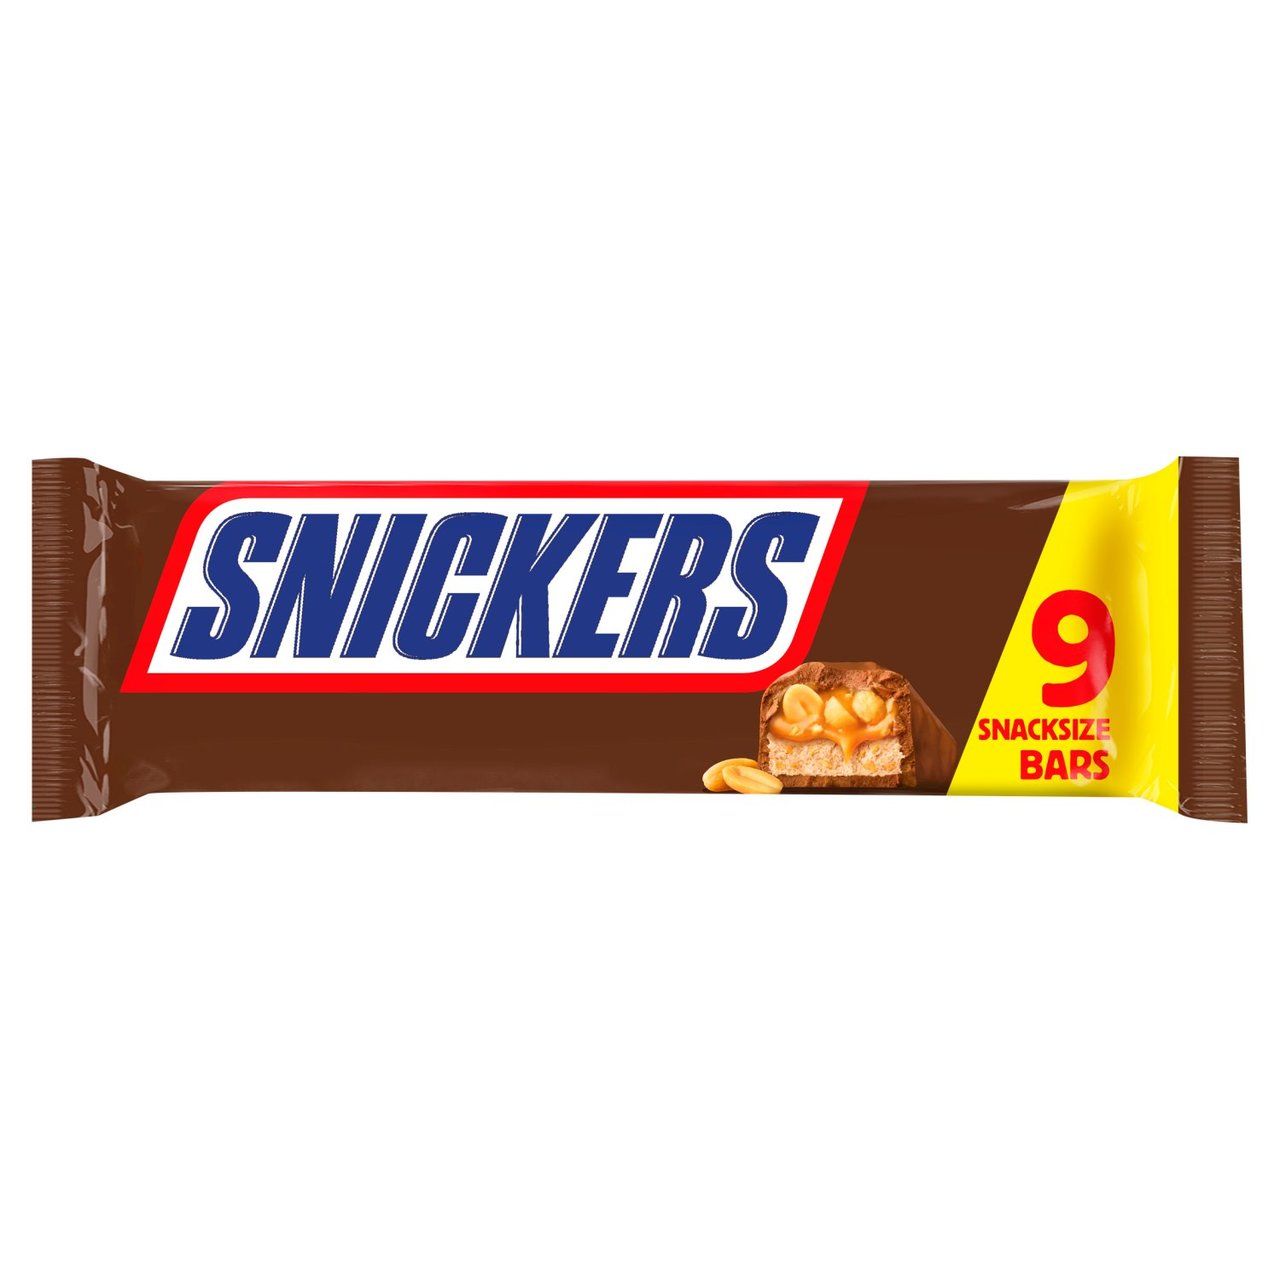 Snickers Caramel, Nougat, Peanuts & Milk Chocolate Snack Bars Multipack 9 x 35.5g